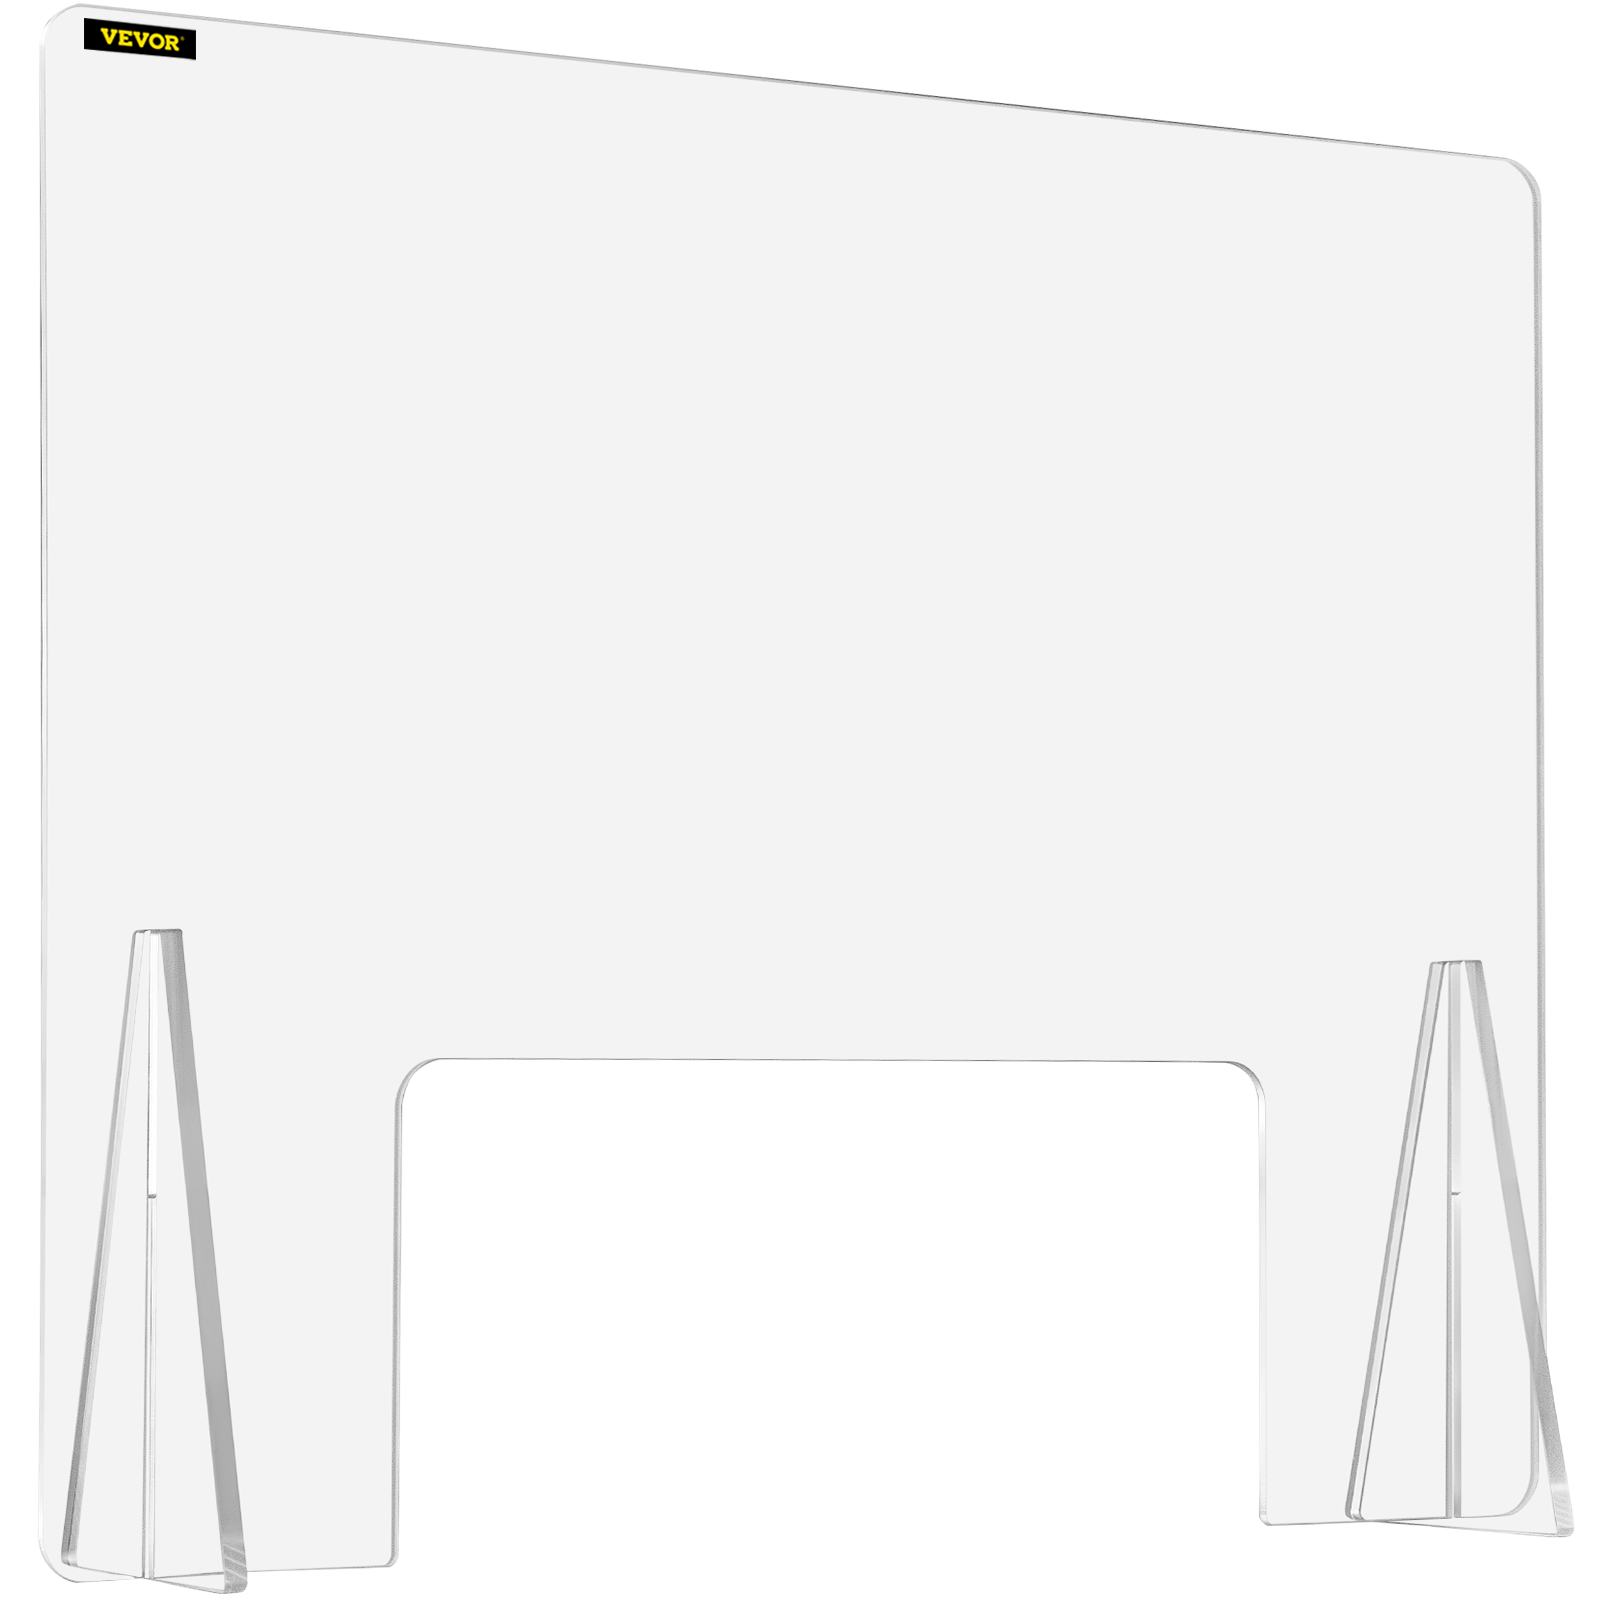 Vevor Sneeze Guard For Counter Acrylic Shield 24"x33.5" With Transaction Window от Vevor Many GEOs